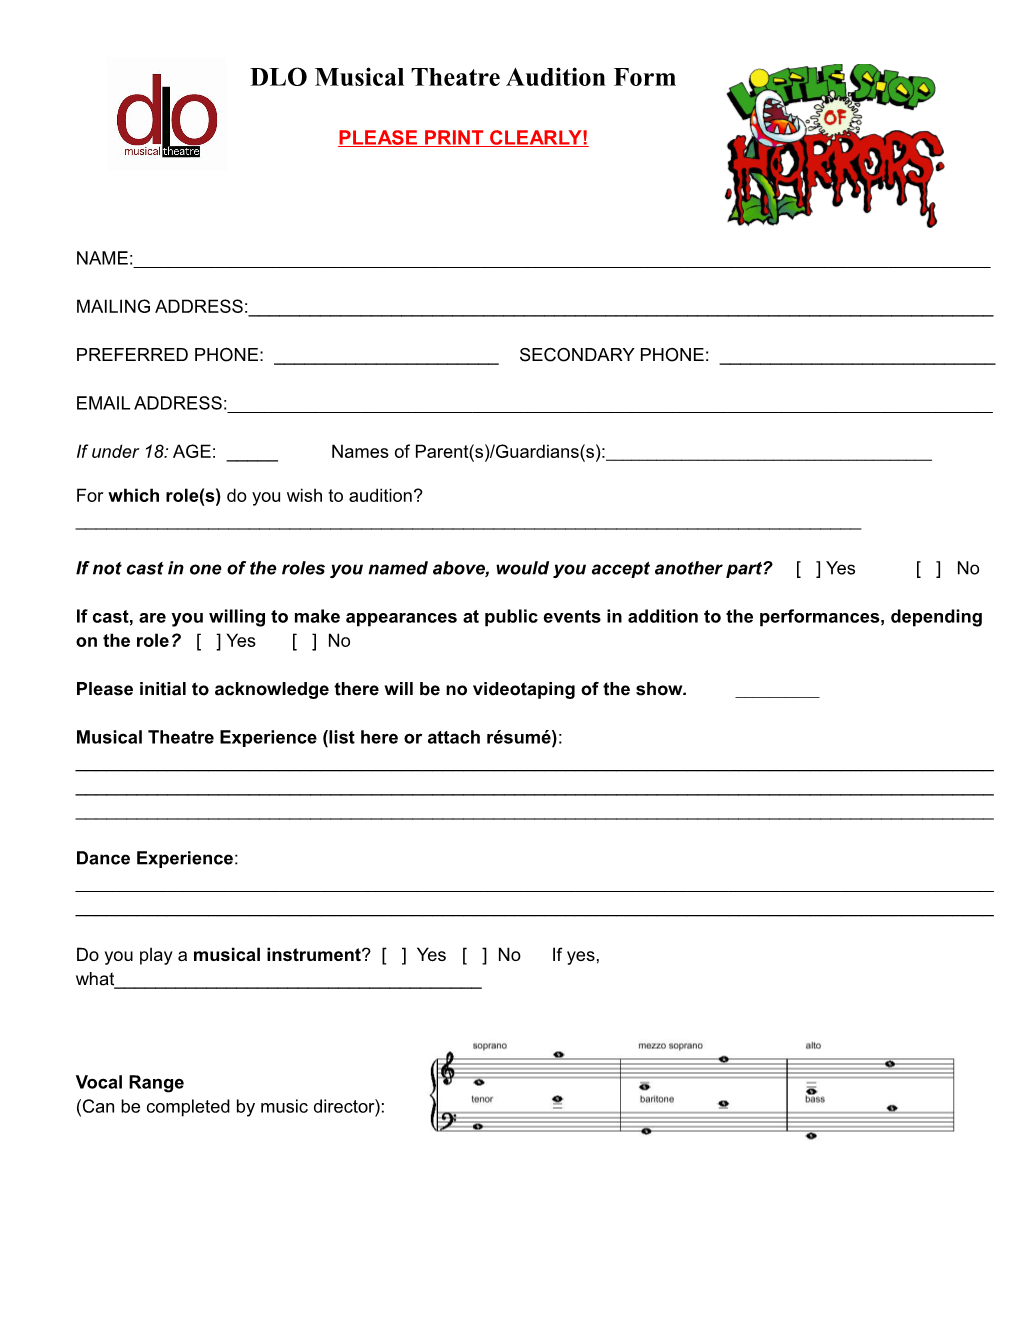 DLO Musical Theatre Audition Form